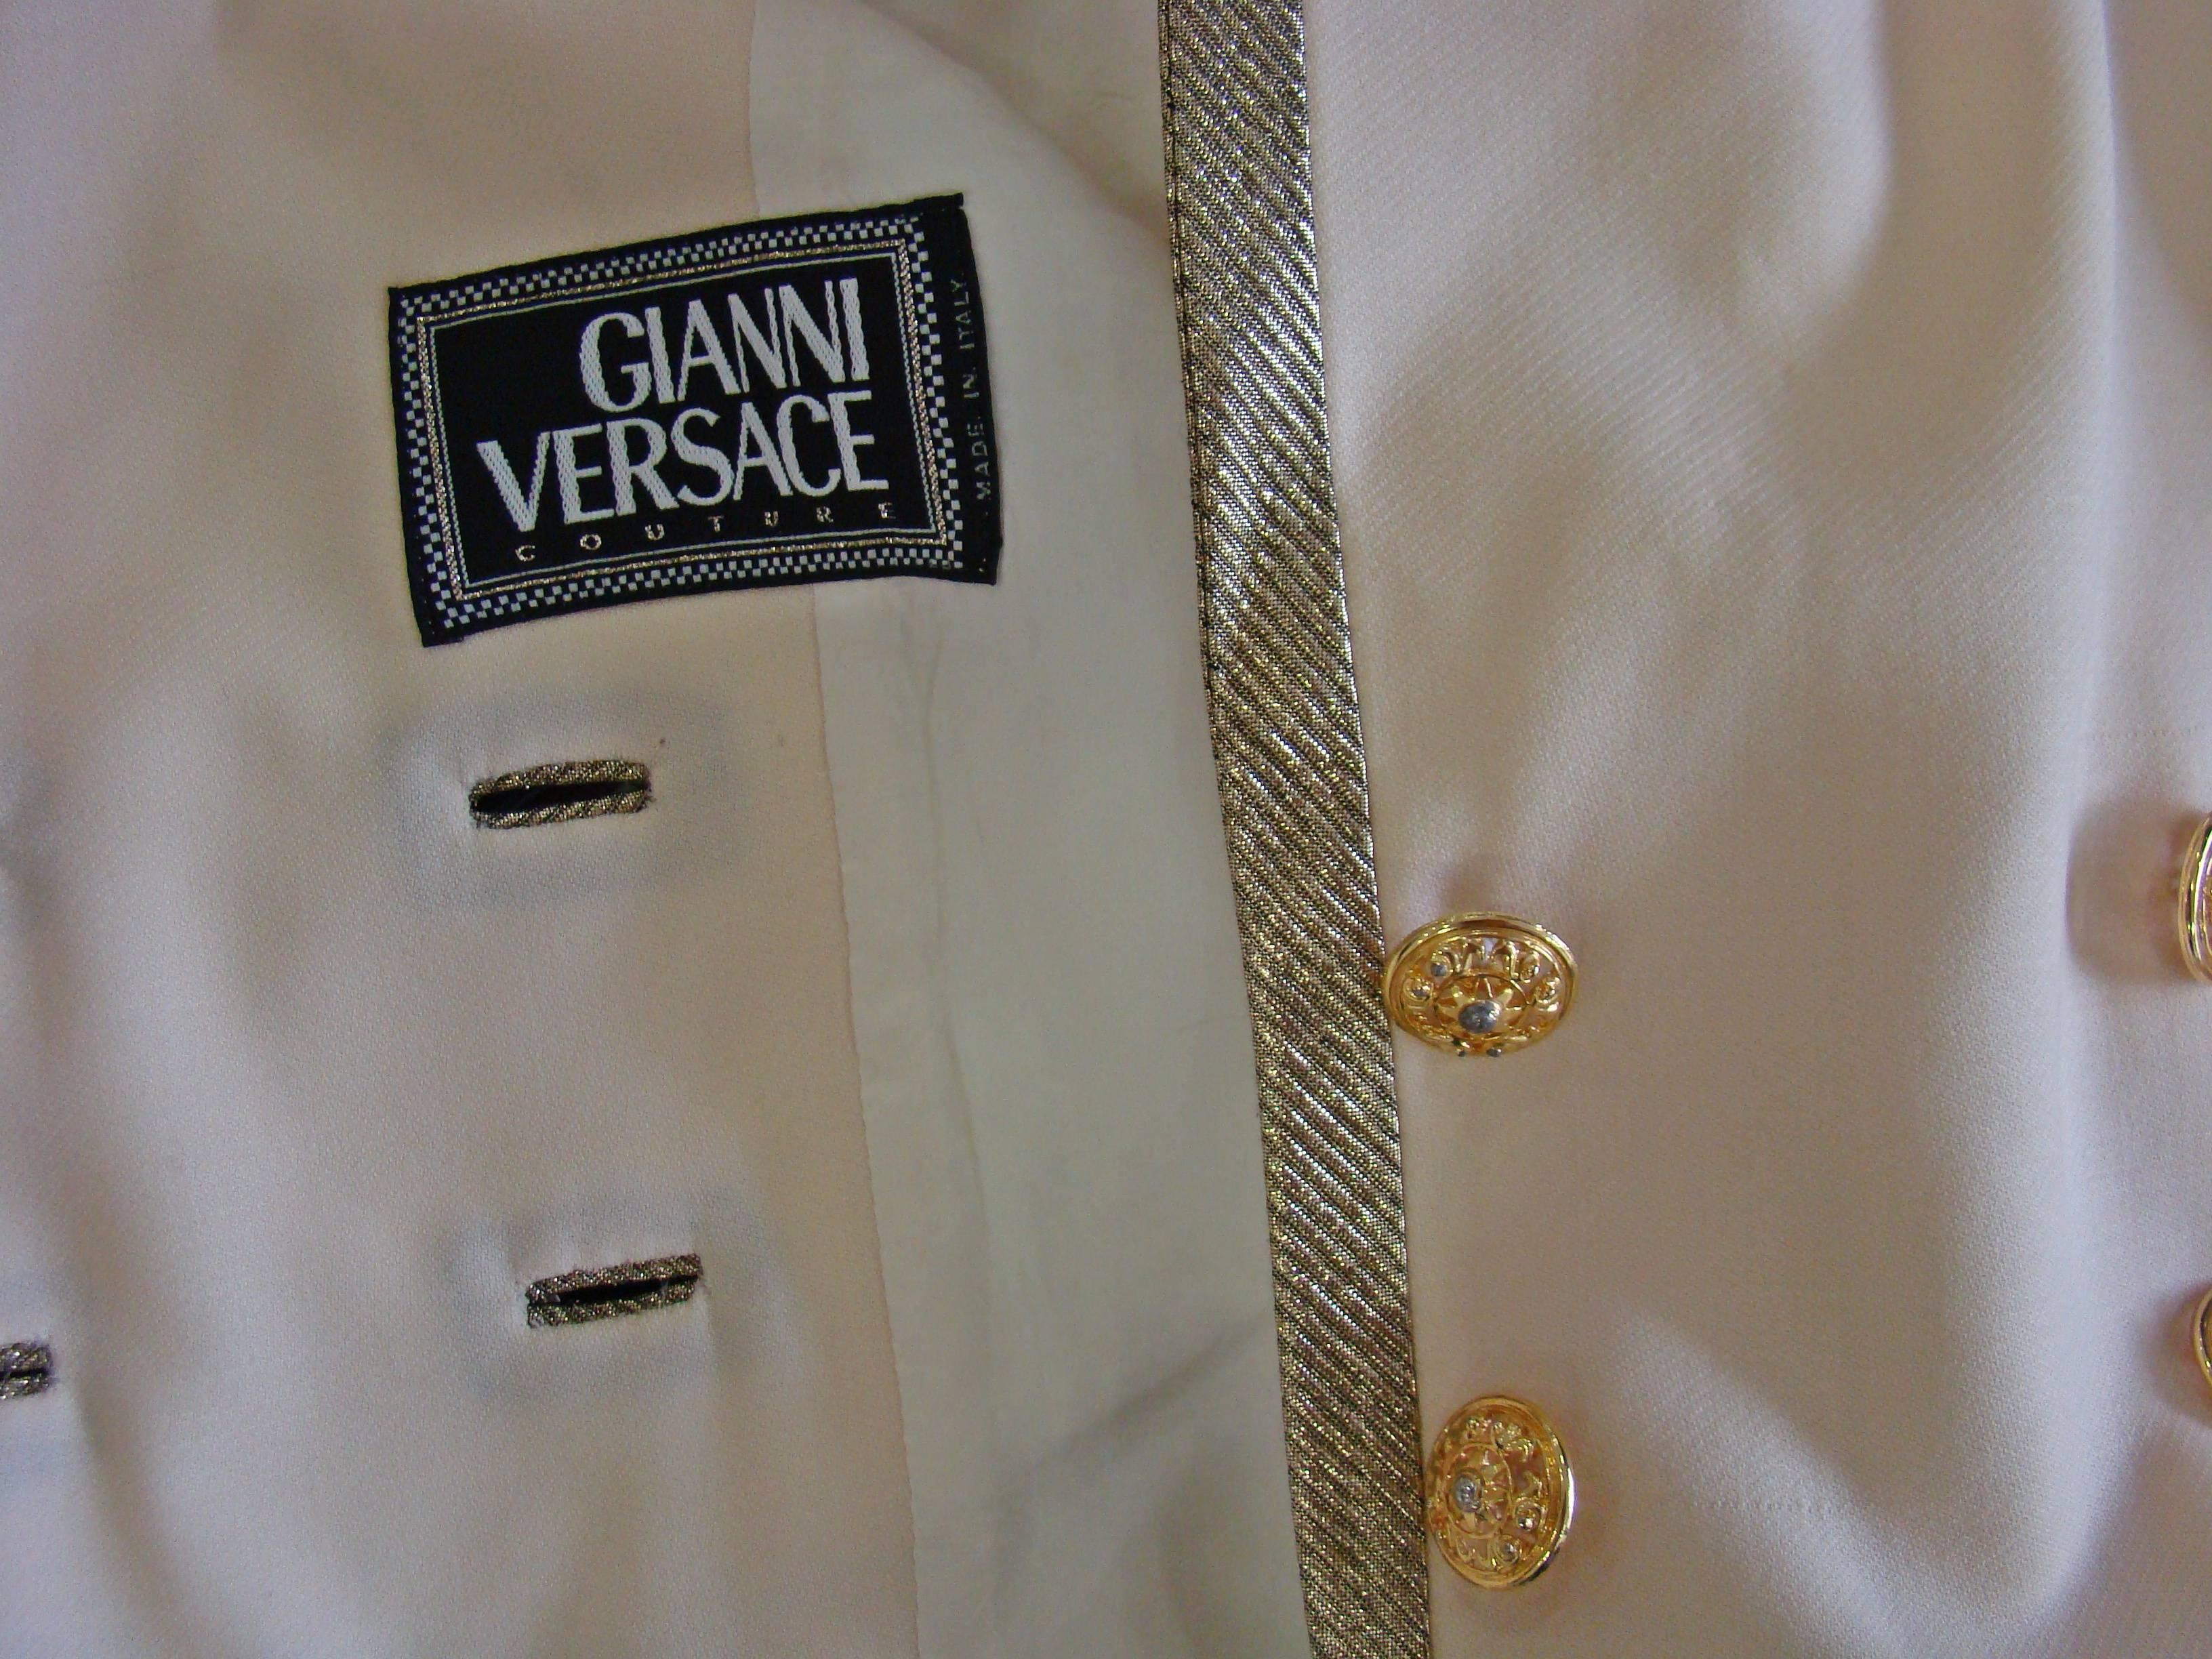 Gianni Versace Couture Cropped Gold Metallic Braid Jacket Spring 1992 For Sale 4